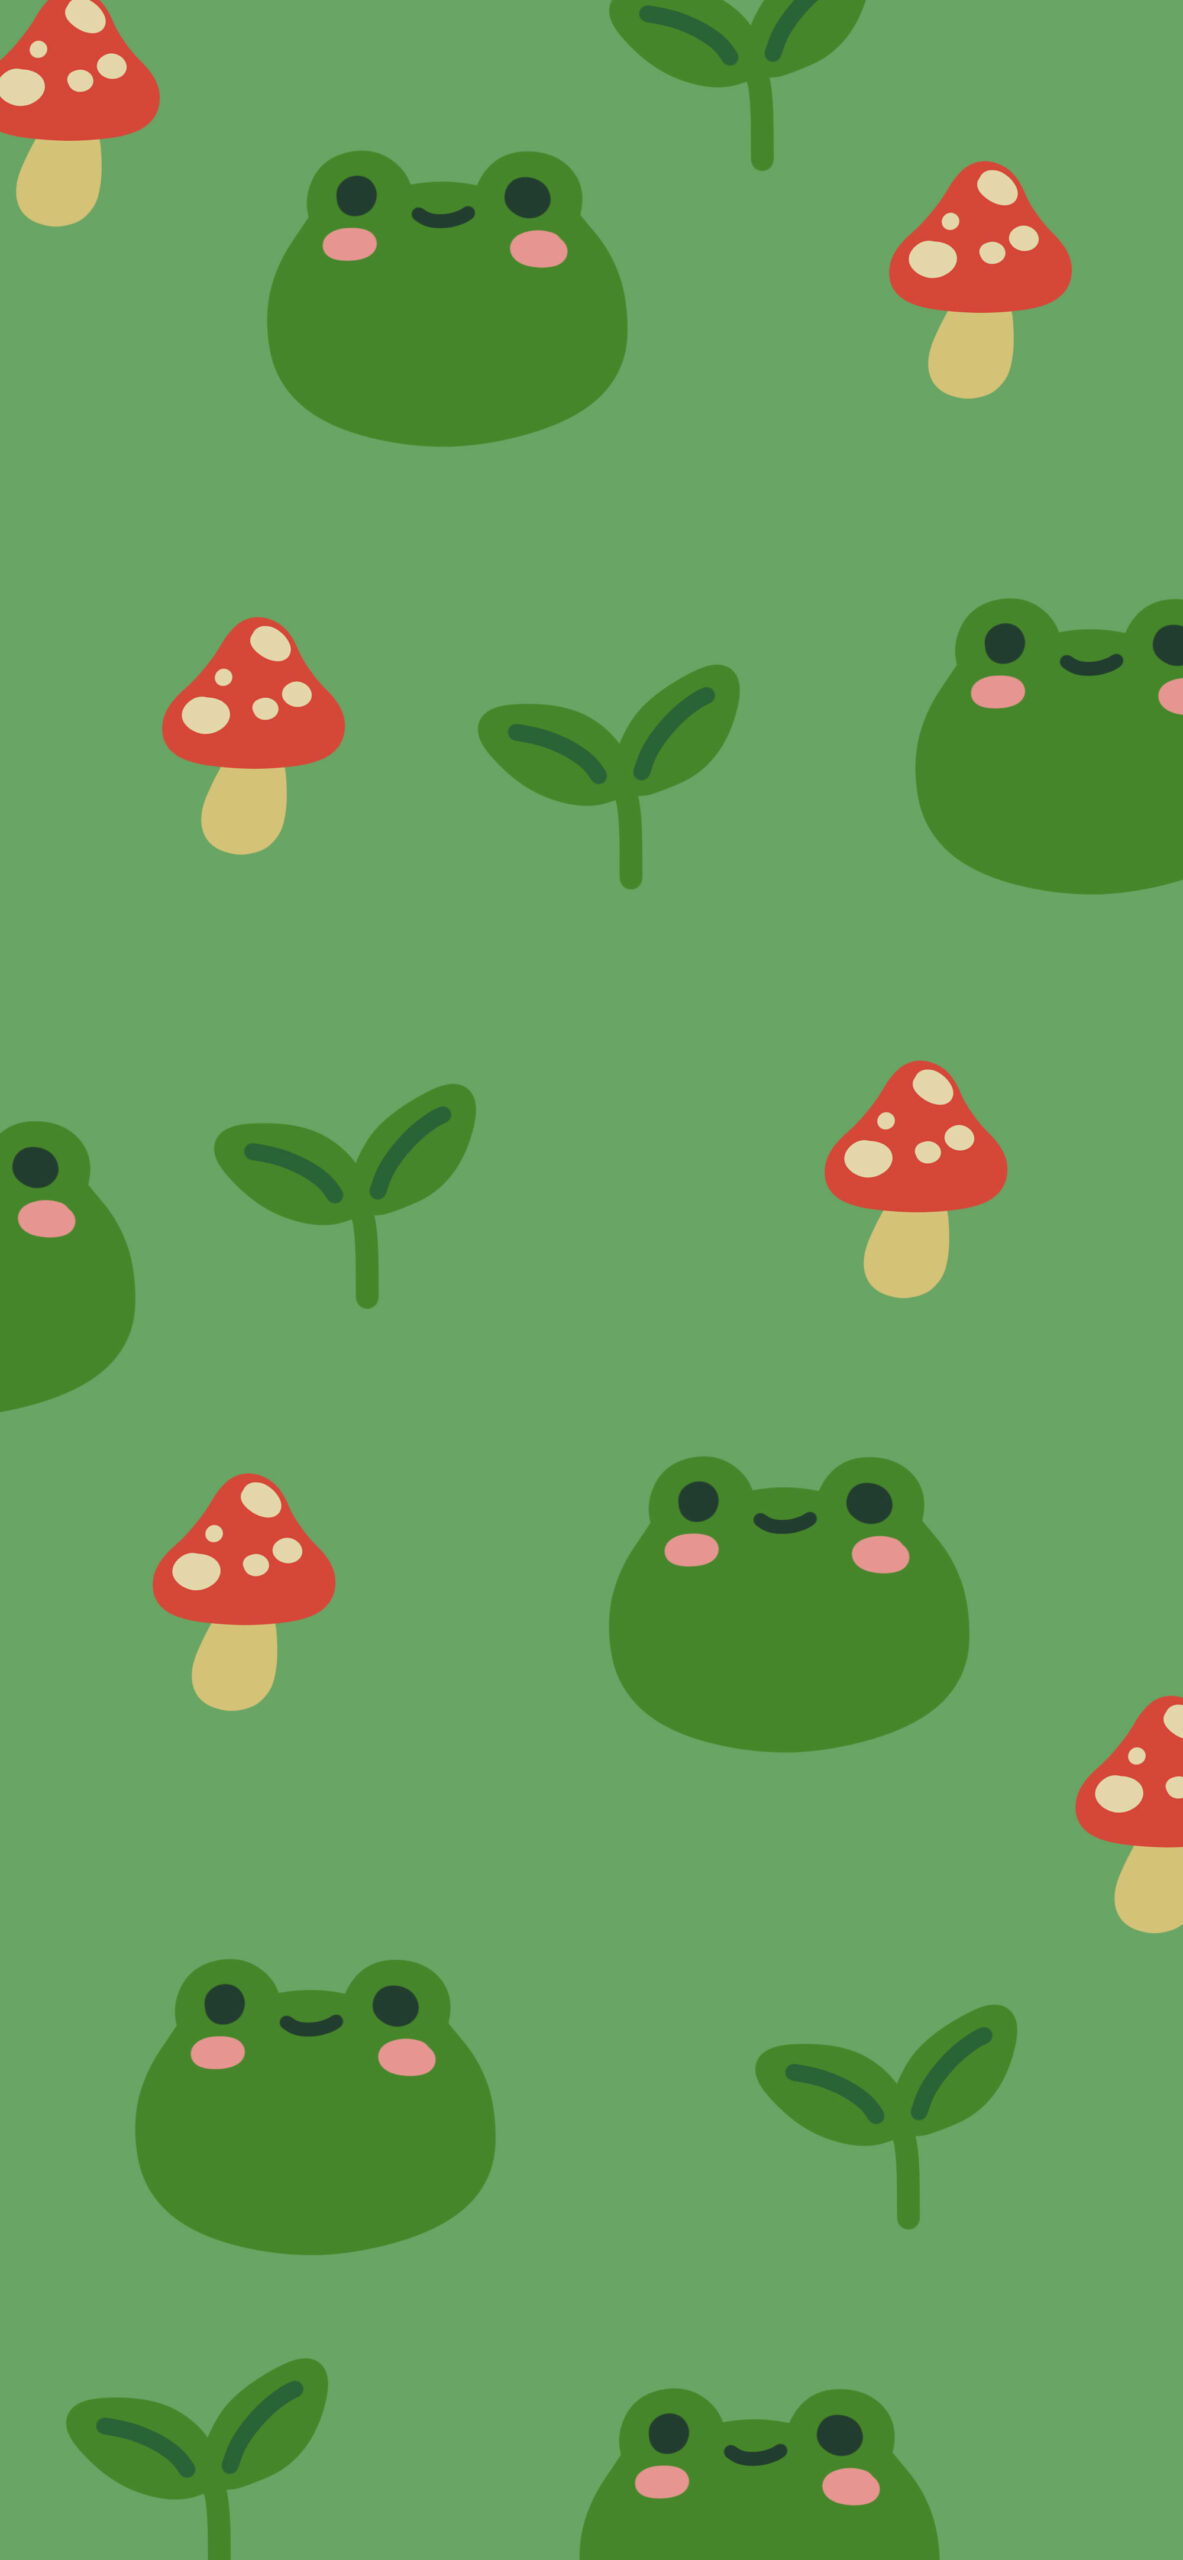 Download Cute Frog Wallpaper Free for Android  Cute Frog Wallpaper APK  Download  STEPrimocom